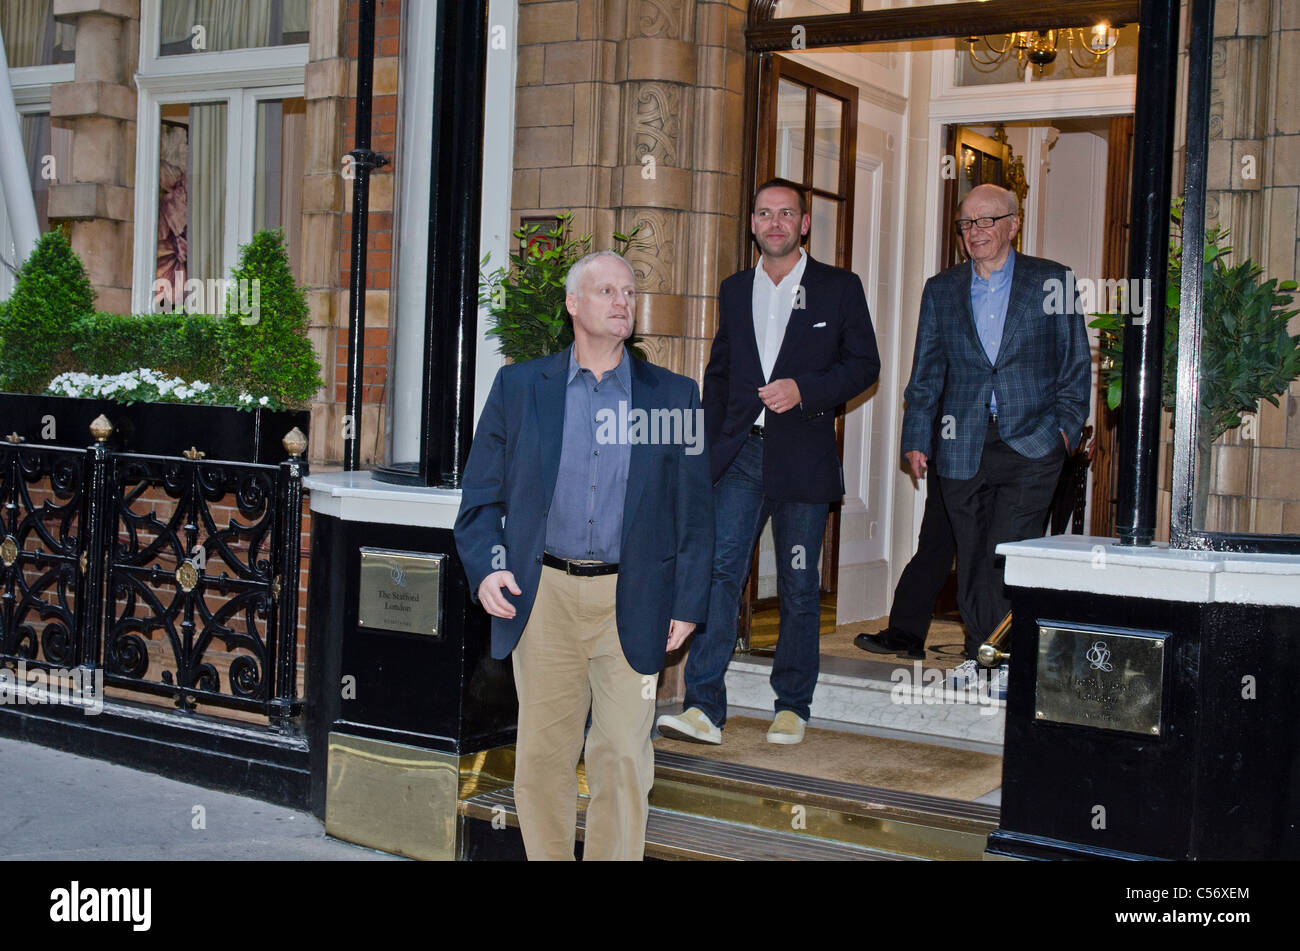 James and Rupert Murdoch outside Stafford Hotel  St james's Place London Uk Media tycoon. Media phone hacking scandal discussion Stock Photo